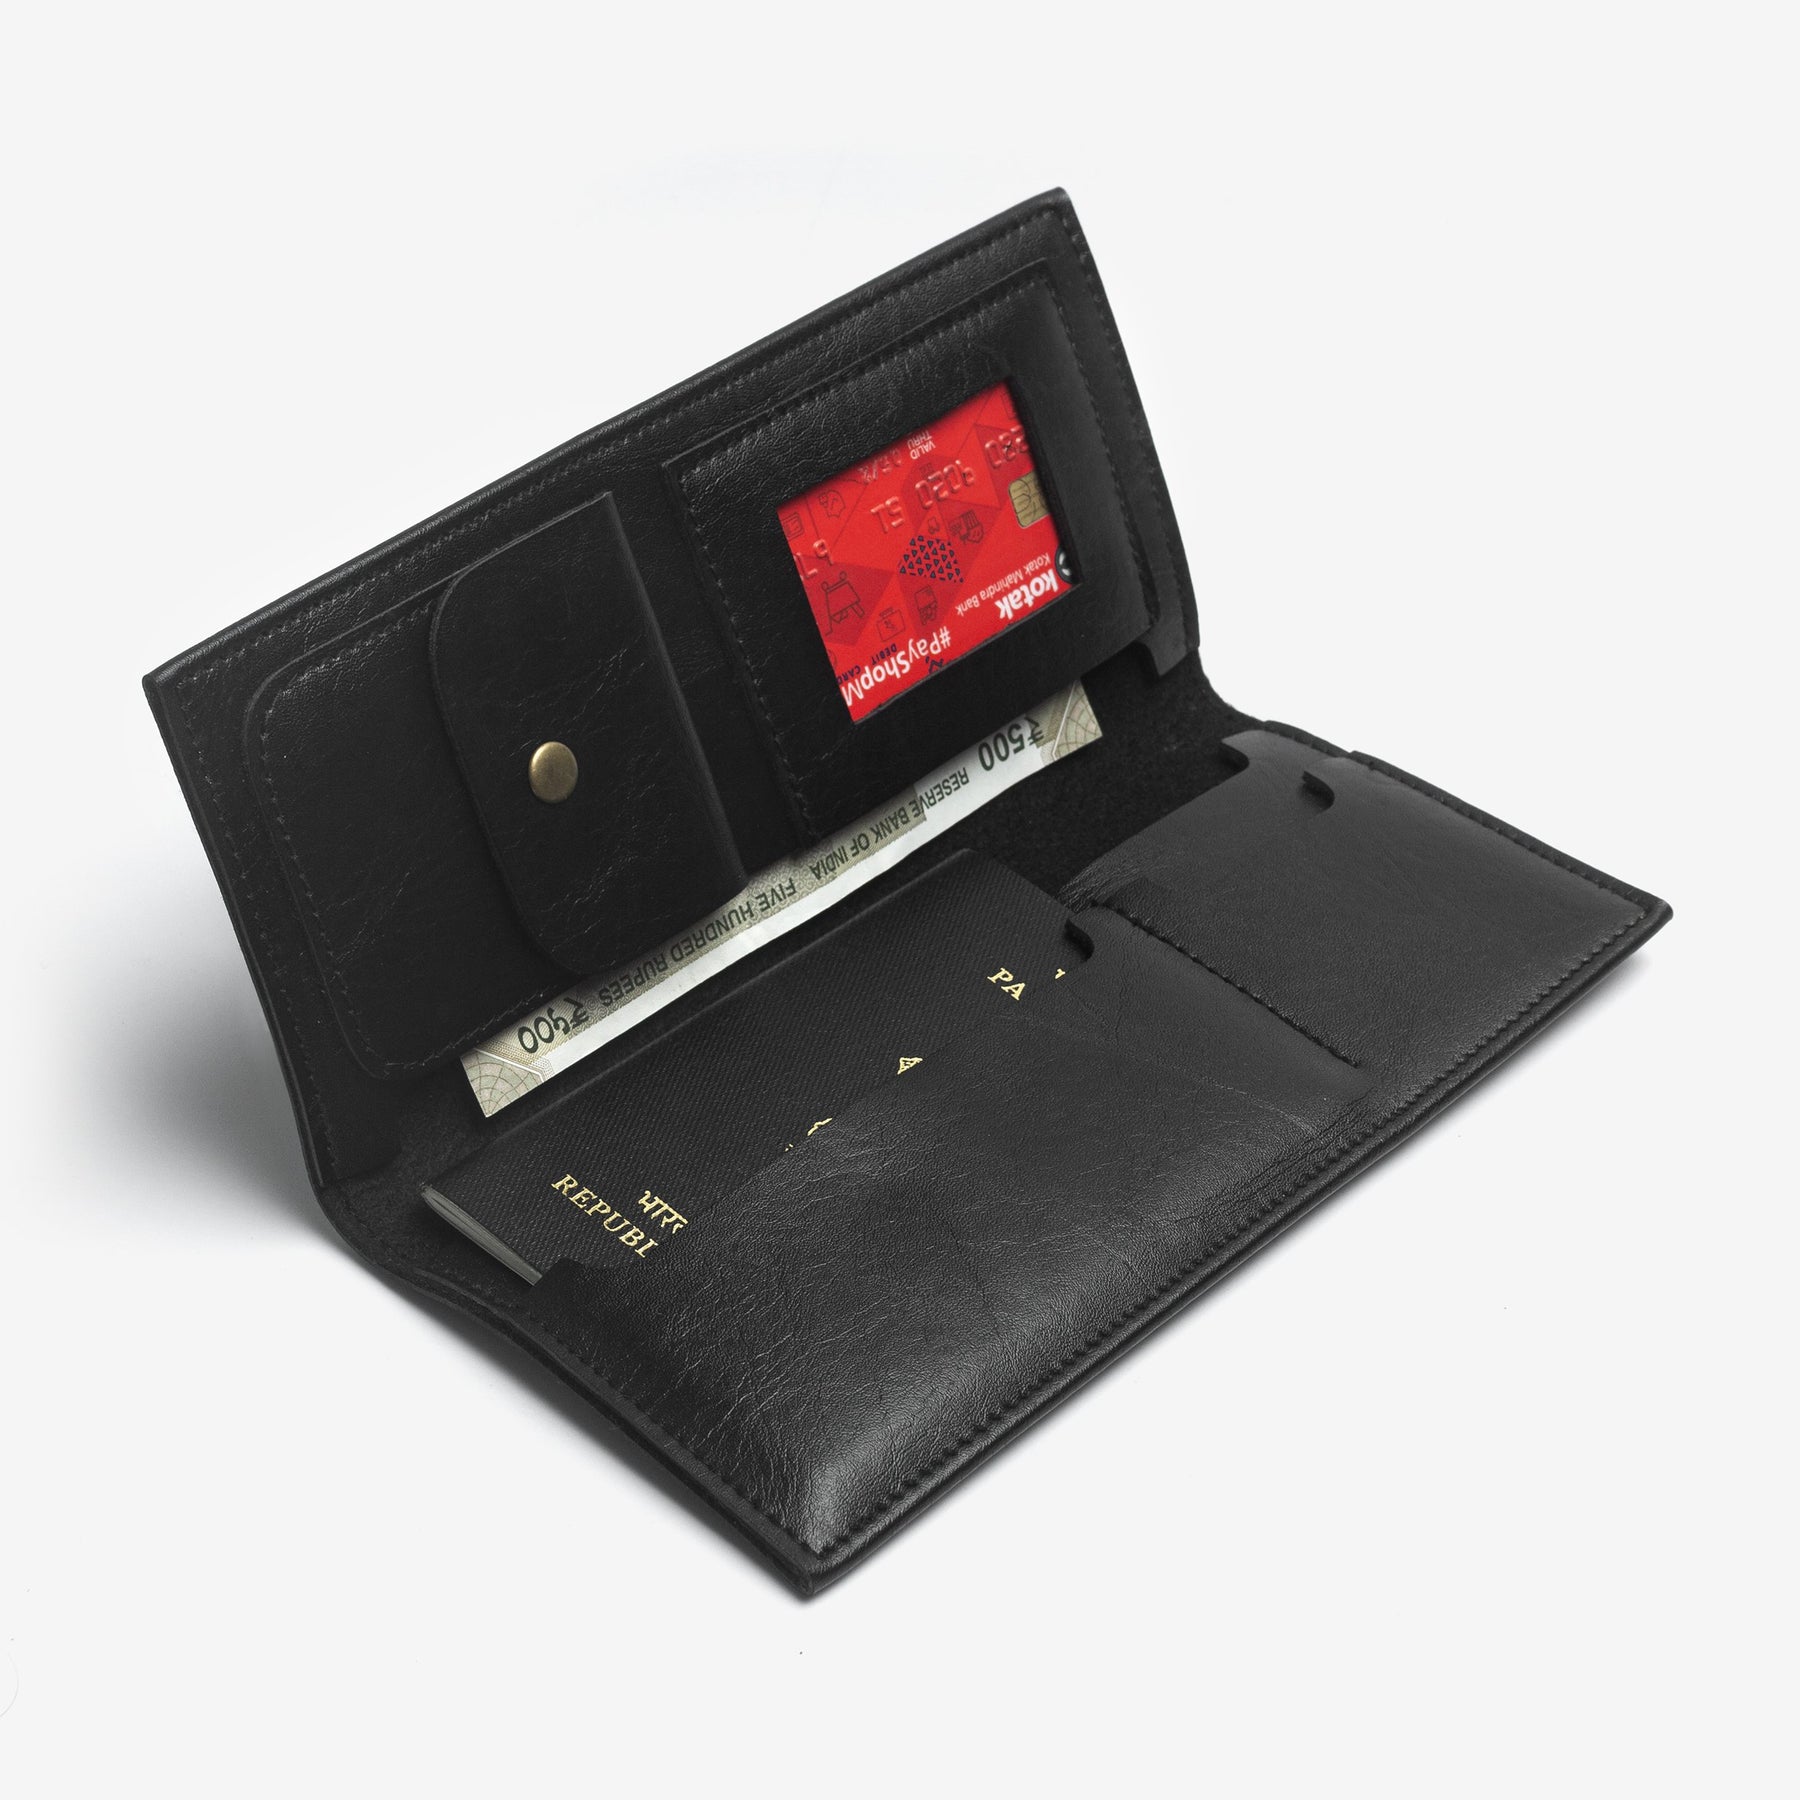 Wallet Customized - Black by The Messy Corner